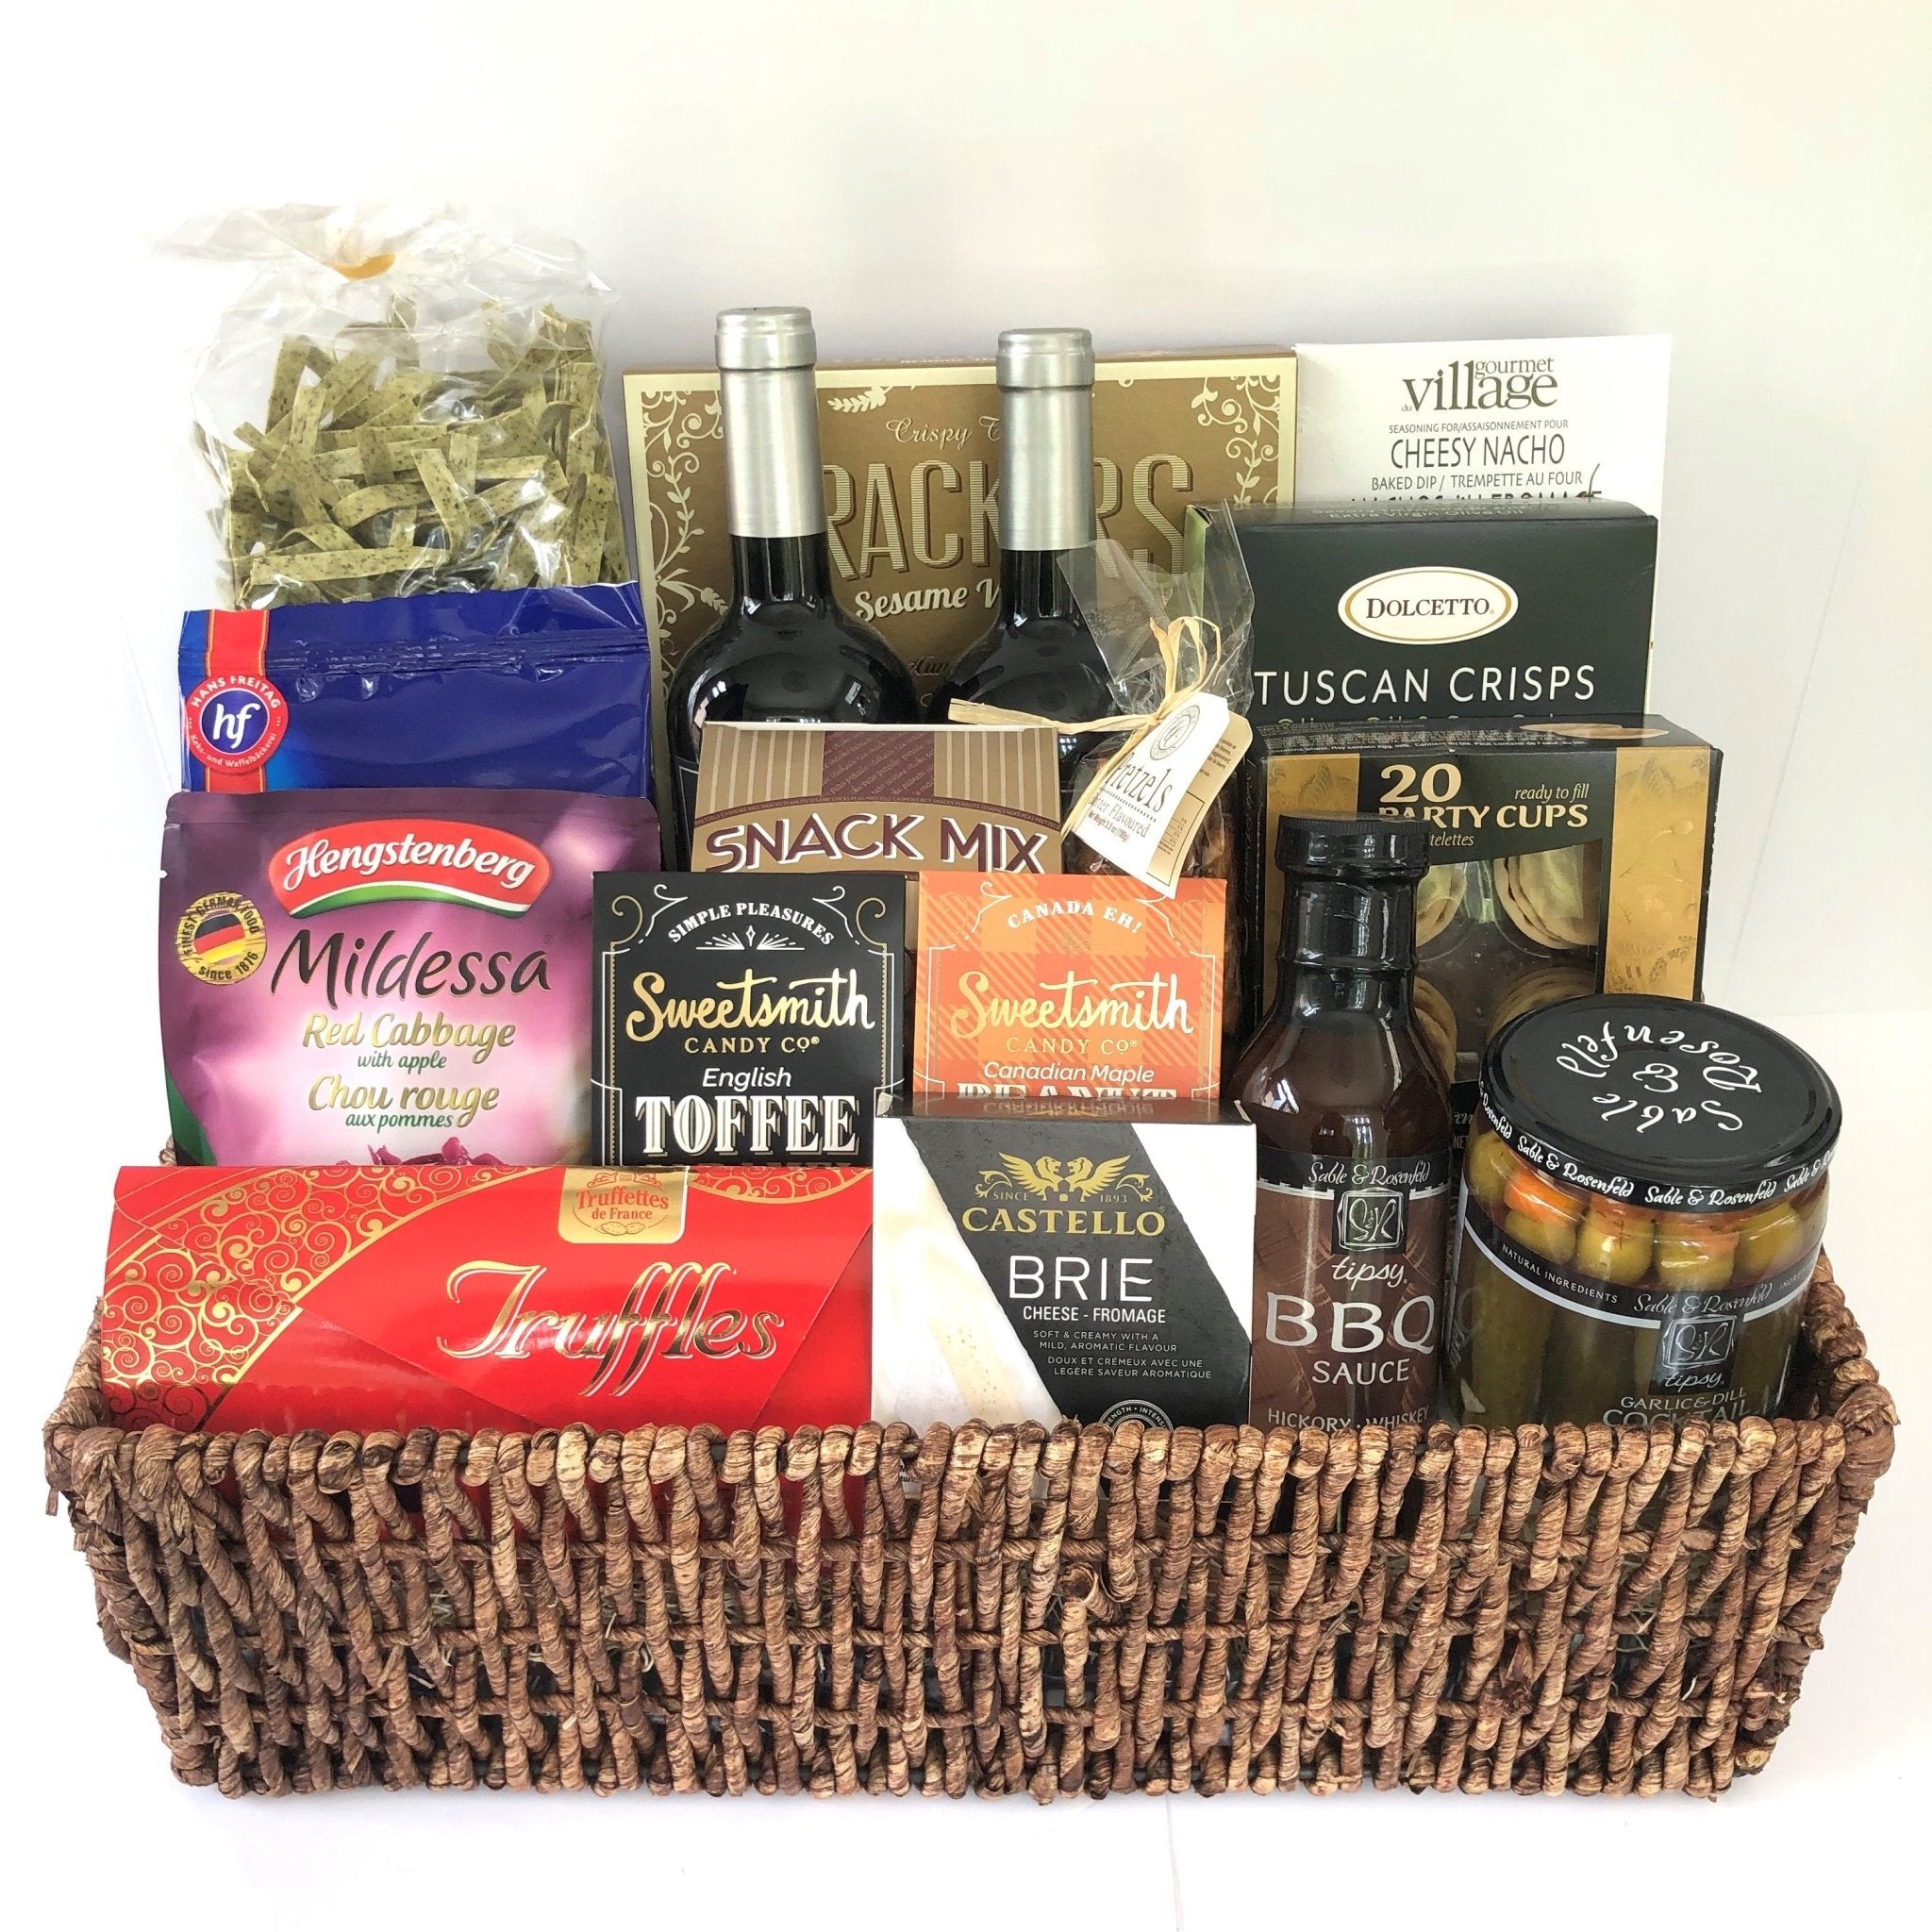 An award winning wine with tasty gourmet snacks placed perfectly in a beautiful metal container make up this  very popular made in Calgary wine gift basket.